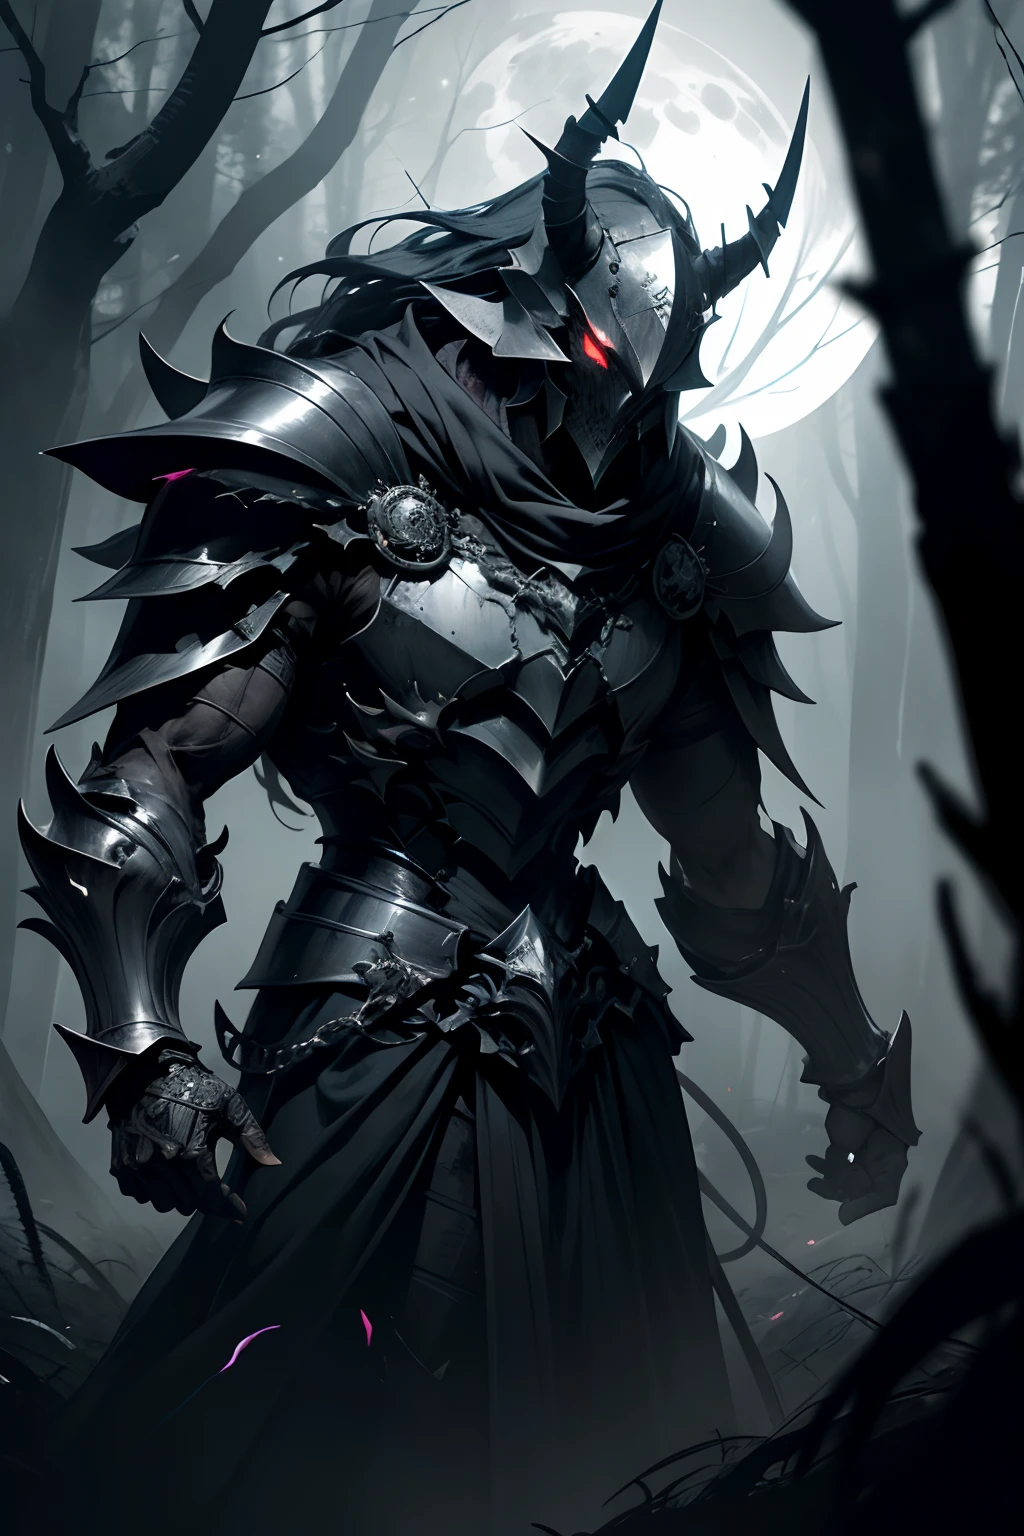 (best quality,highres,ultra-detailed),(dark,ominous,creepy) Nightmare Knight, gleaming menacingly in the moonlit darkness, stalks through a sinister, mist-filled forest. His ebony armor emits an eerie glow, reflecting the pale light of the full moon. With a polished helmet adorned with menacingly sharp horns, he commands fear and awe. His piercing, red eyes seem to penetrate the soul of anyone who dares meet his gaze. The Knight's cloak billows behind him, swaying with an otherworldly presence. 

The forest is shrouded in an eerie darkness, with twisted trees reaching out their skeletal branches, as if reaching for unsuspecting prey. The ground is covered in thick, ominous mist that obscures the path, creating an unsettling atmosphere. Shadows dance and flicker, creating an illusion of movement, as if the forest itself is alive.

The Nightmare Knight clutches a wickedly sharp, blood-stained sword in his armored hand, ready to strike down any unfortunate soul that crosses his path. The sword glimmers with an unholy energy, emanating a faint reddish glow. 

As the moonlight filters through the dense canopy, it illuminates the Knight's figure with a chilling blue hue, casting long, eerie shadows in his wake. The moon's glow highlights the intricate details of the Knight's armor, revealing intricate engravings and sinister symbols.

The Nightmare Knight's armor is adorned with ancient, tattered black feathers, reminiscent of a fallen angel. The feathers rustle with an otherworldly whisper as he moves, adding an unsettling sound to the eerie forest ambience.

The color palette of the scene is dominated by dark and muted tones, with hints of deep purples and blues to enhance the sinister atmosphere. The moonlight casts a silvery glow, adding a touch of ethereal beauty to the haunting scene.

The forest is enveloped in a soft, eerie glow, emphasizing the contrast between light and darkness. This lighting creates dramatic chiaroscuro effects, enhancing the menacing presence